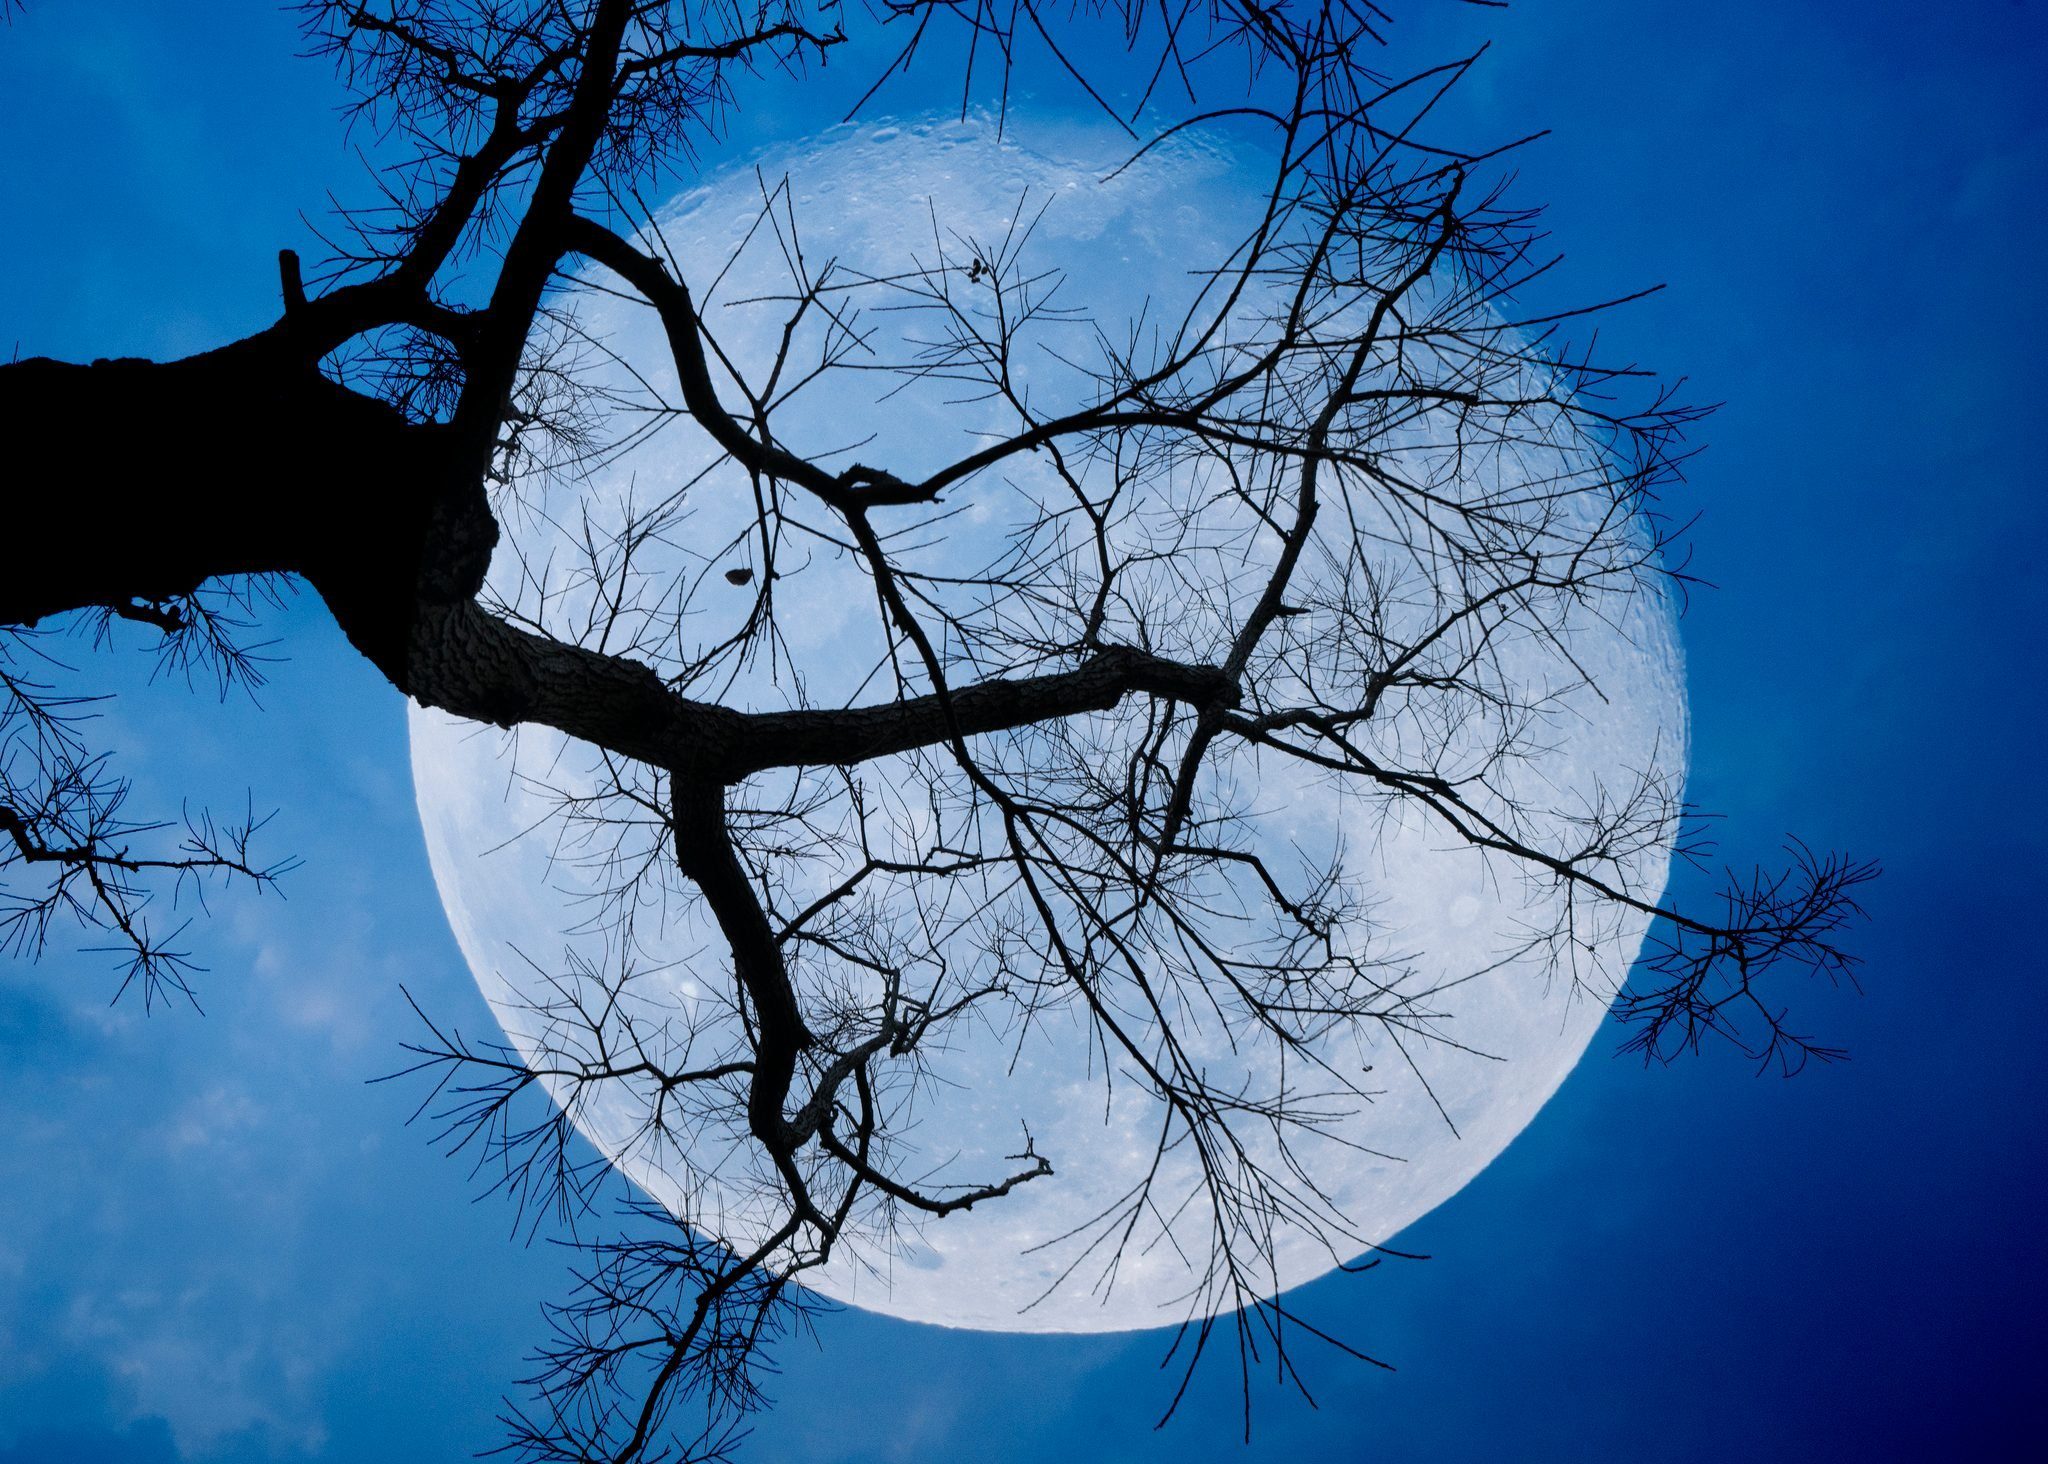 Full moon between branches with blue sky in background